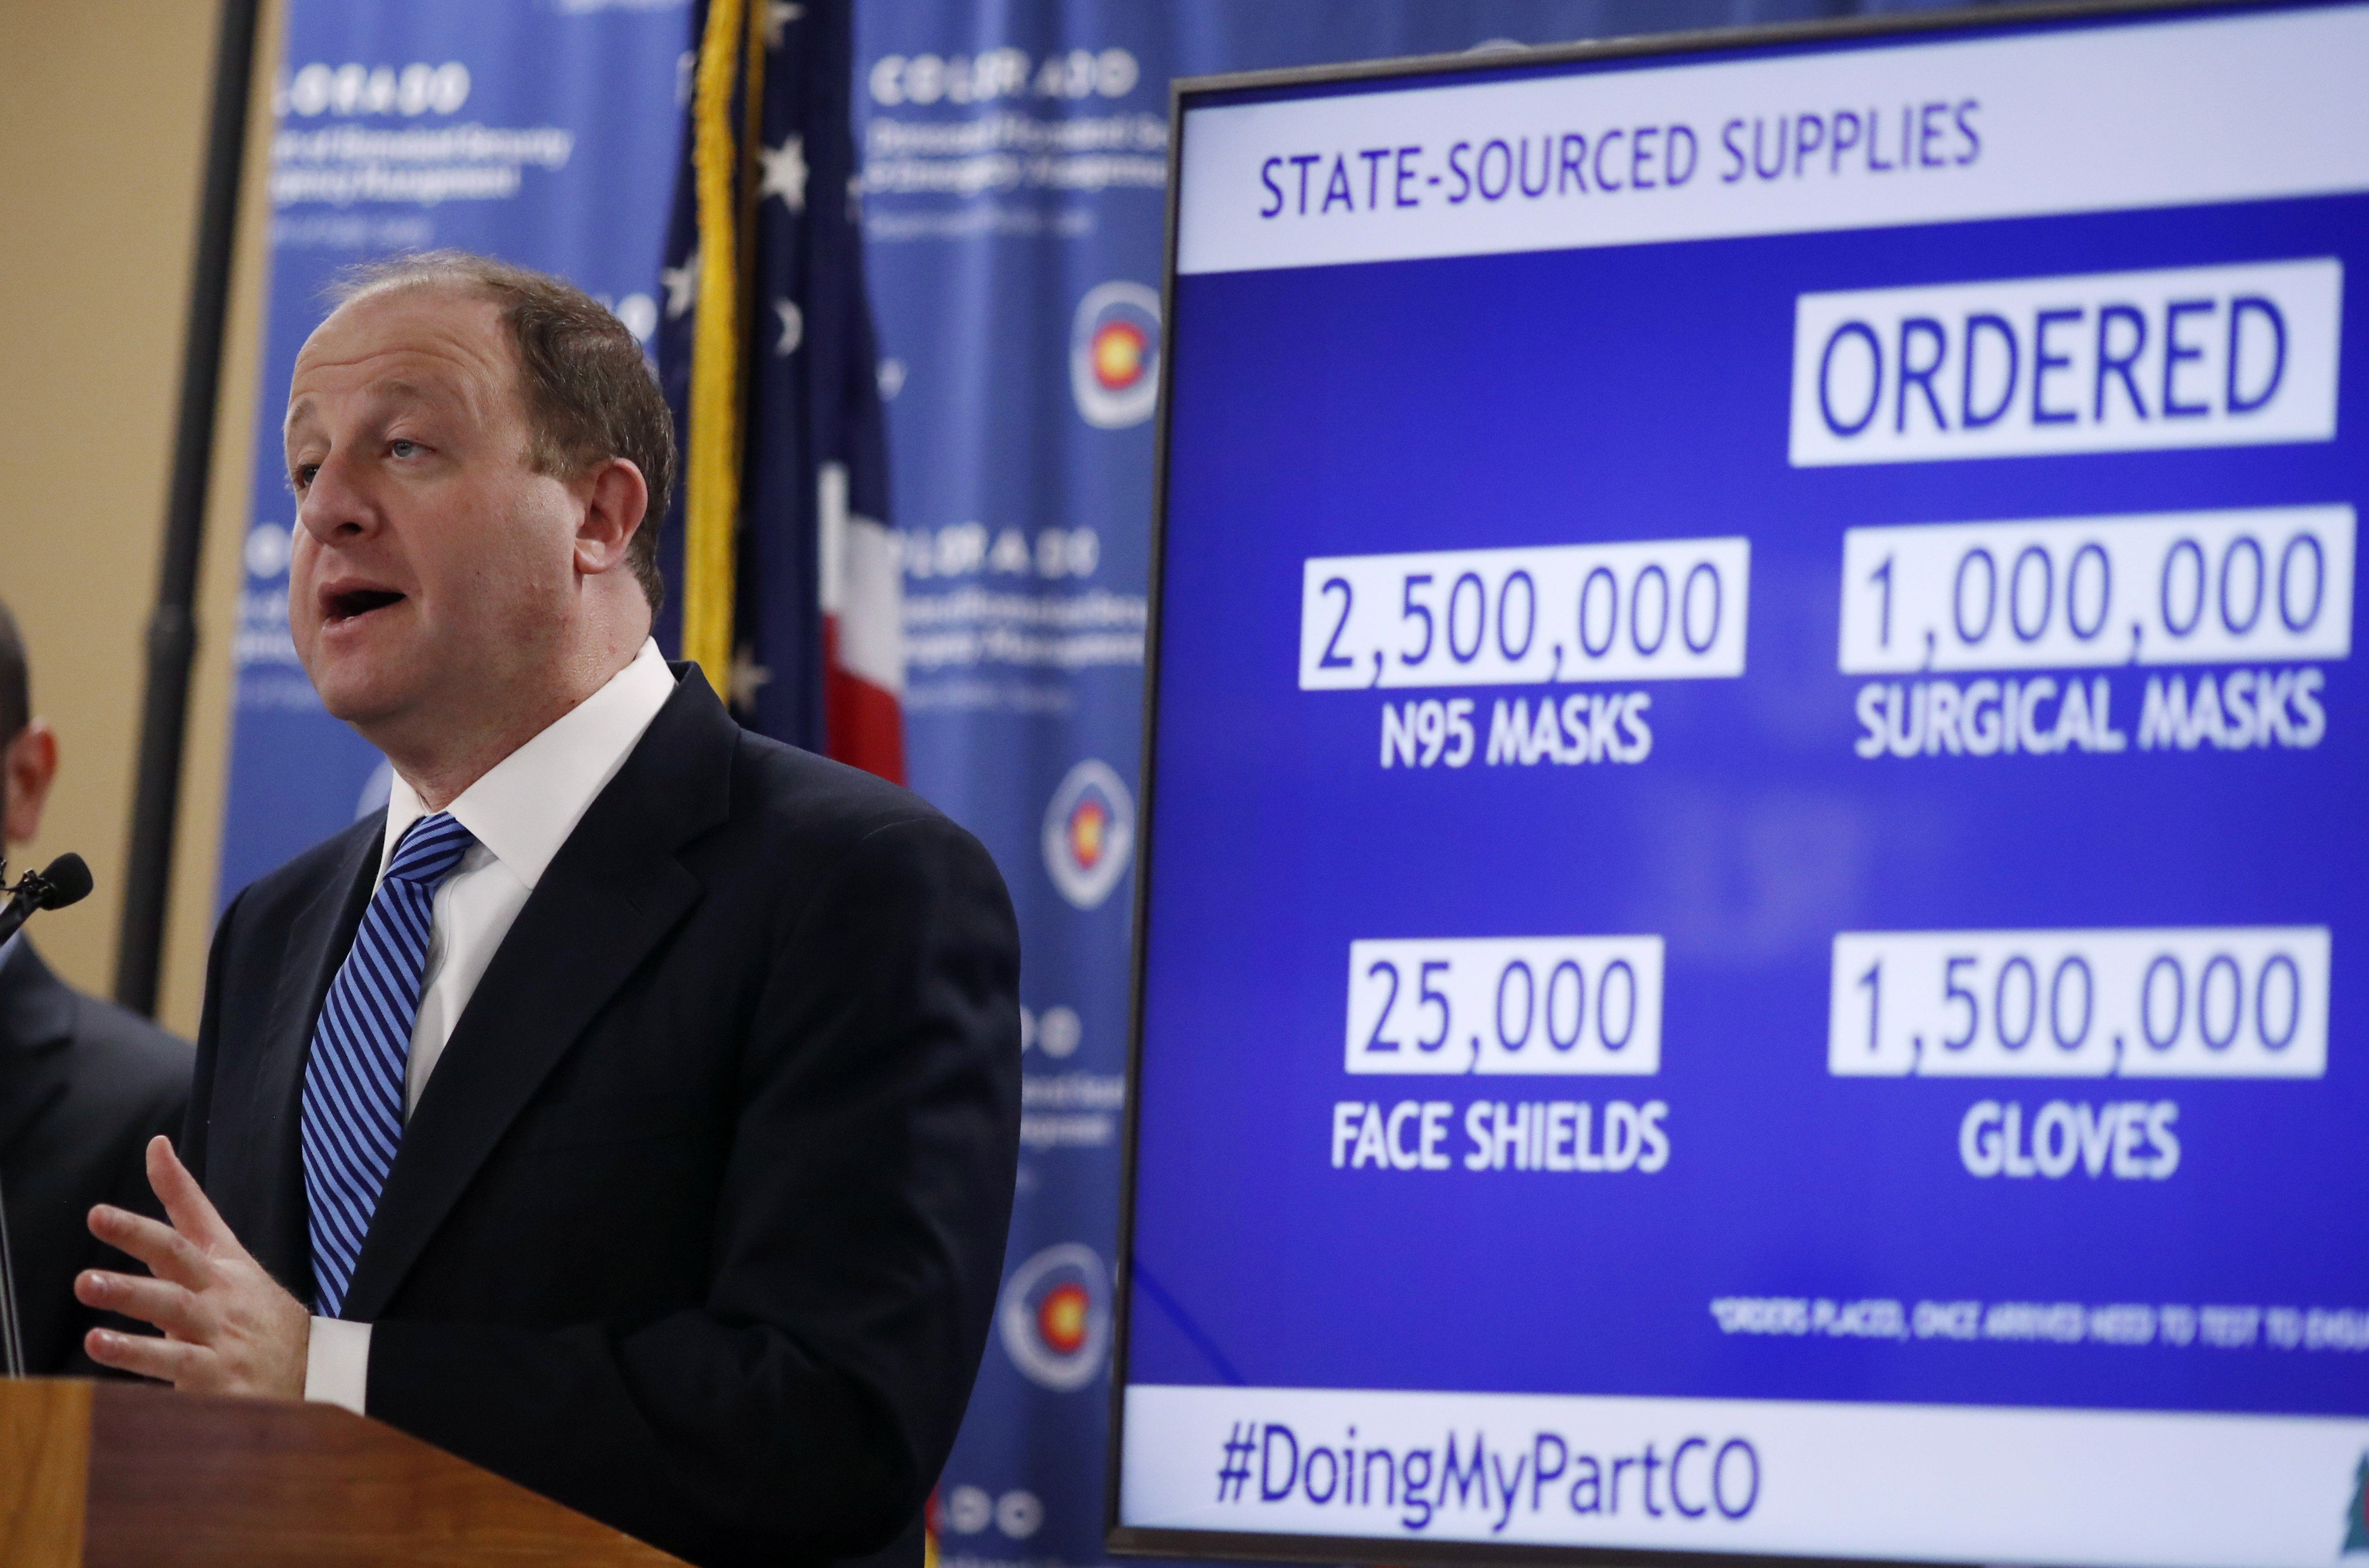 Colorado Gov. Jared Polis speaks at a news conference in Centennial, Colorado, on Wednesday, April 1.